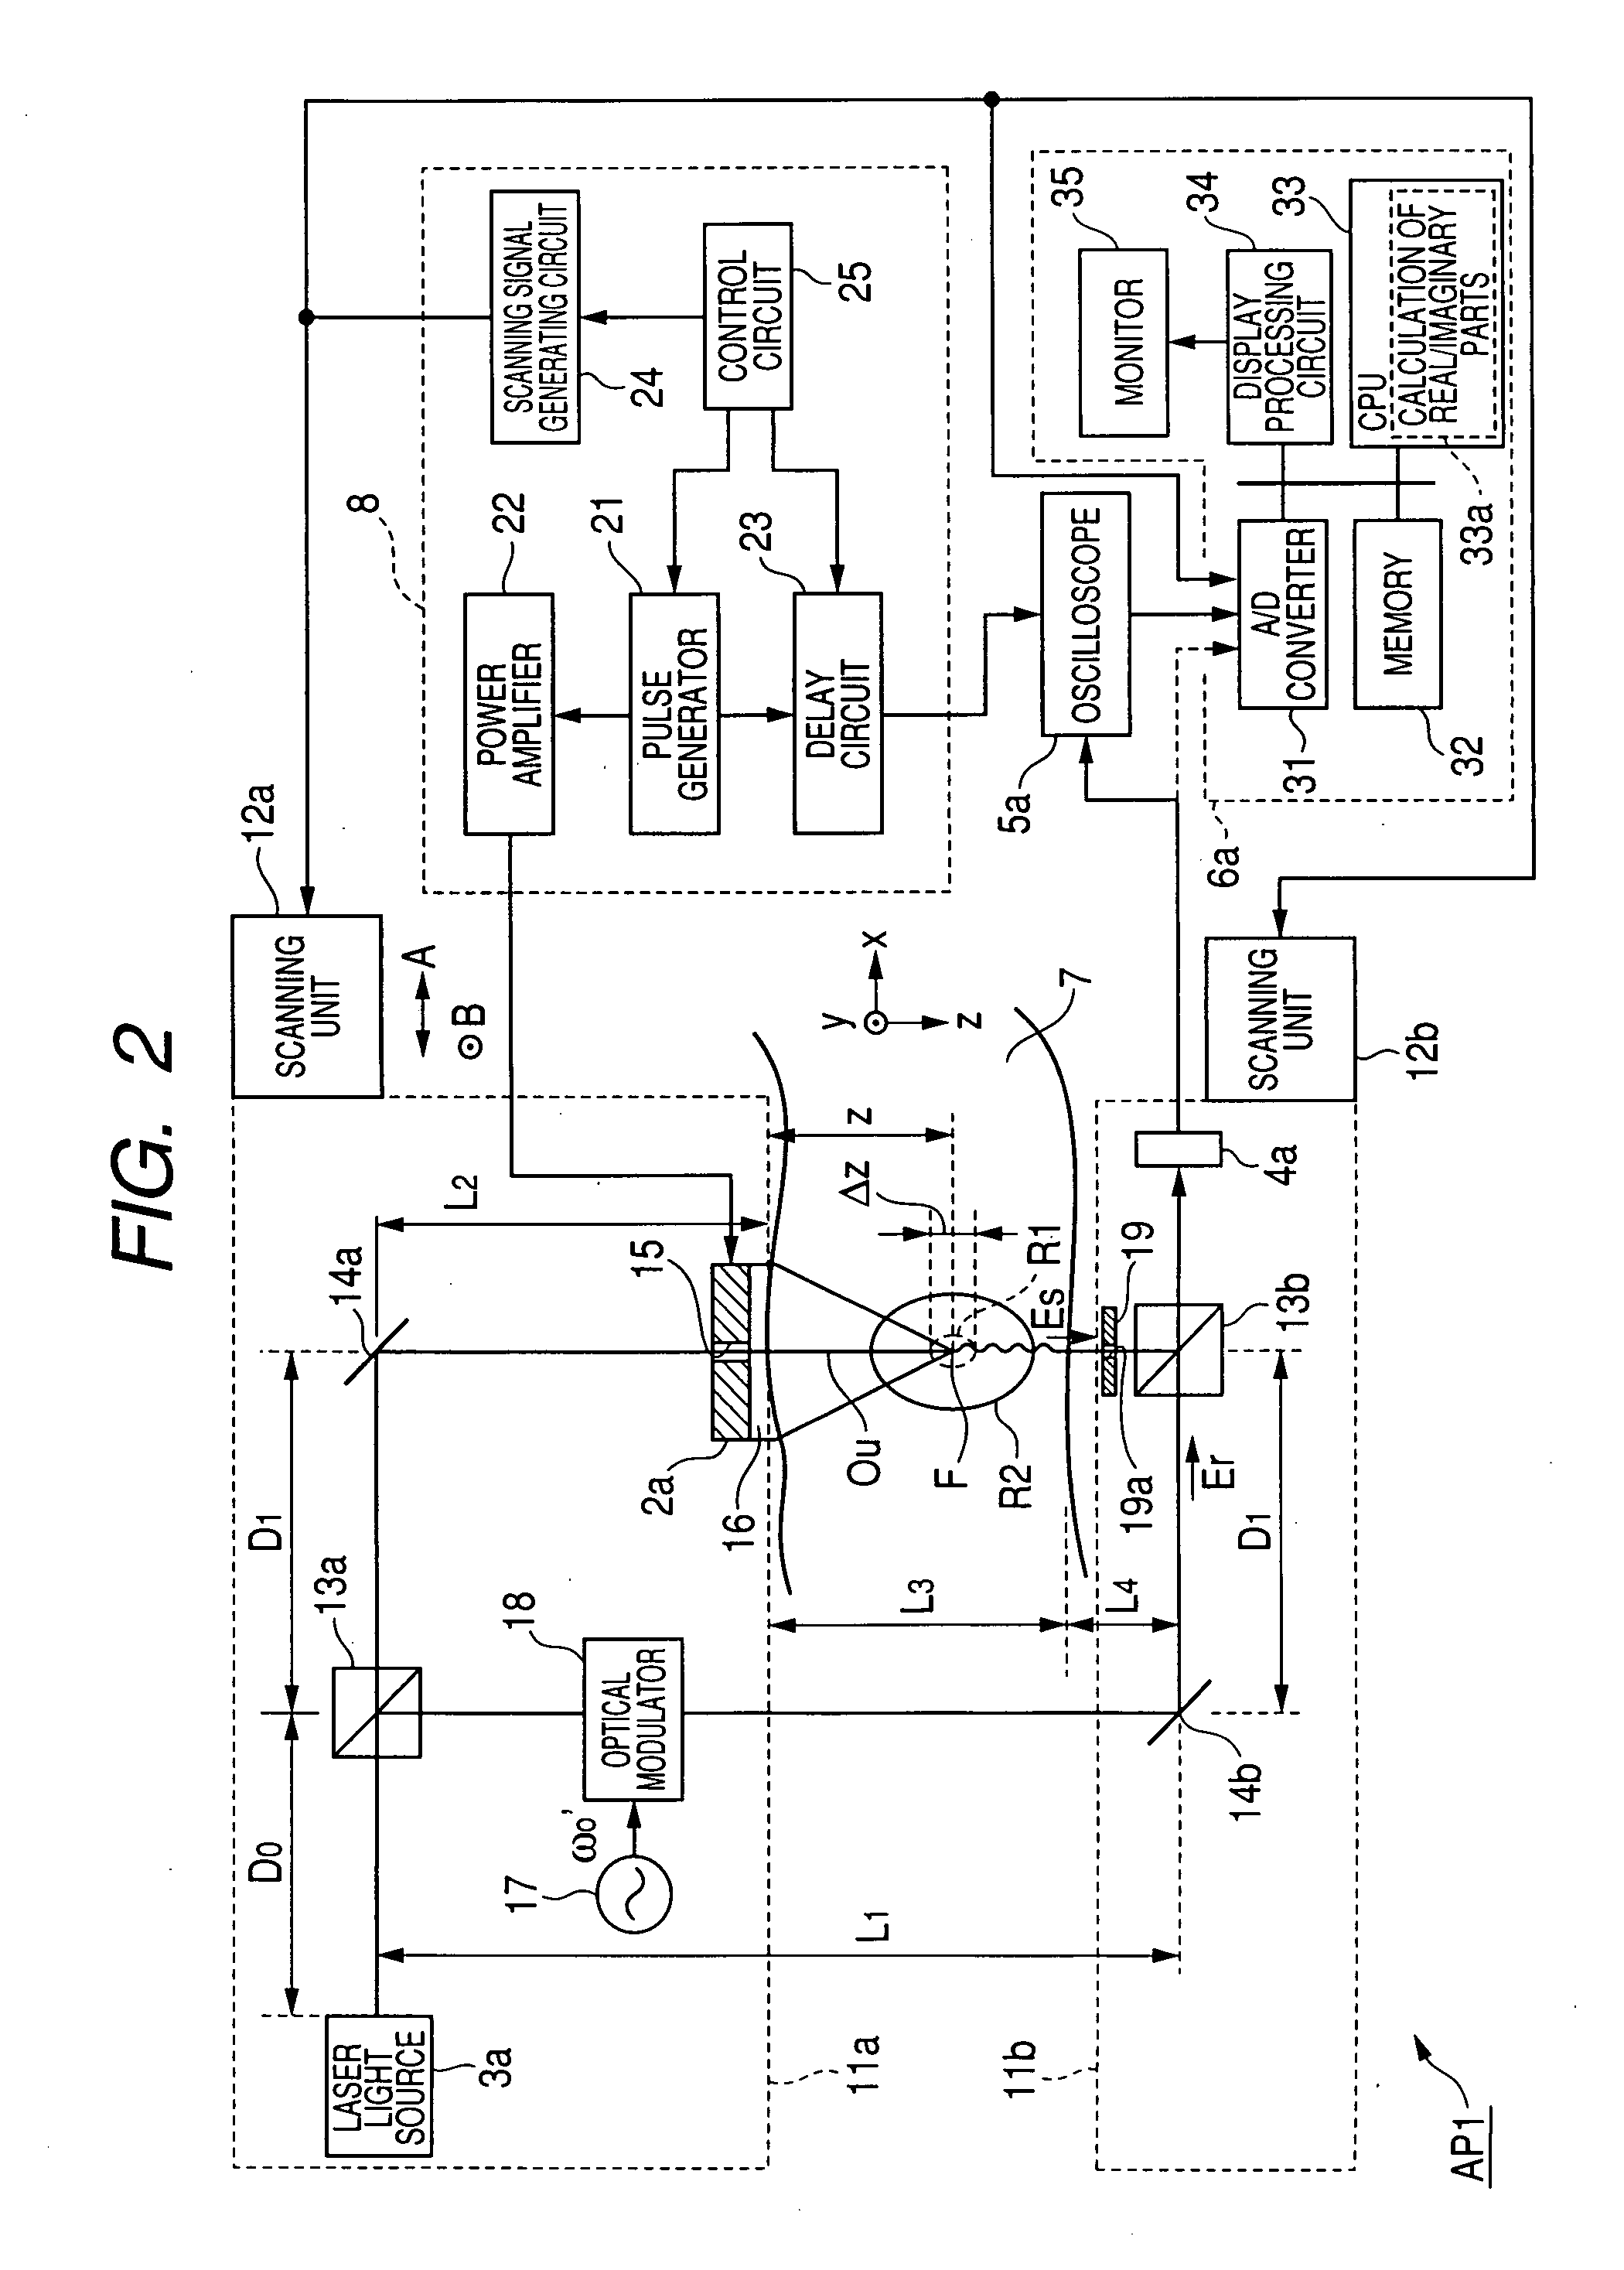 Method and apparatus for analyzing characteristic information of object with the use of mutual interaction between ultrasound wave and light